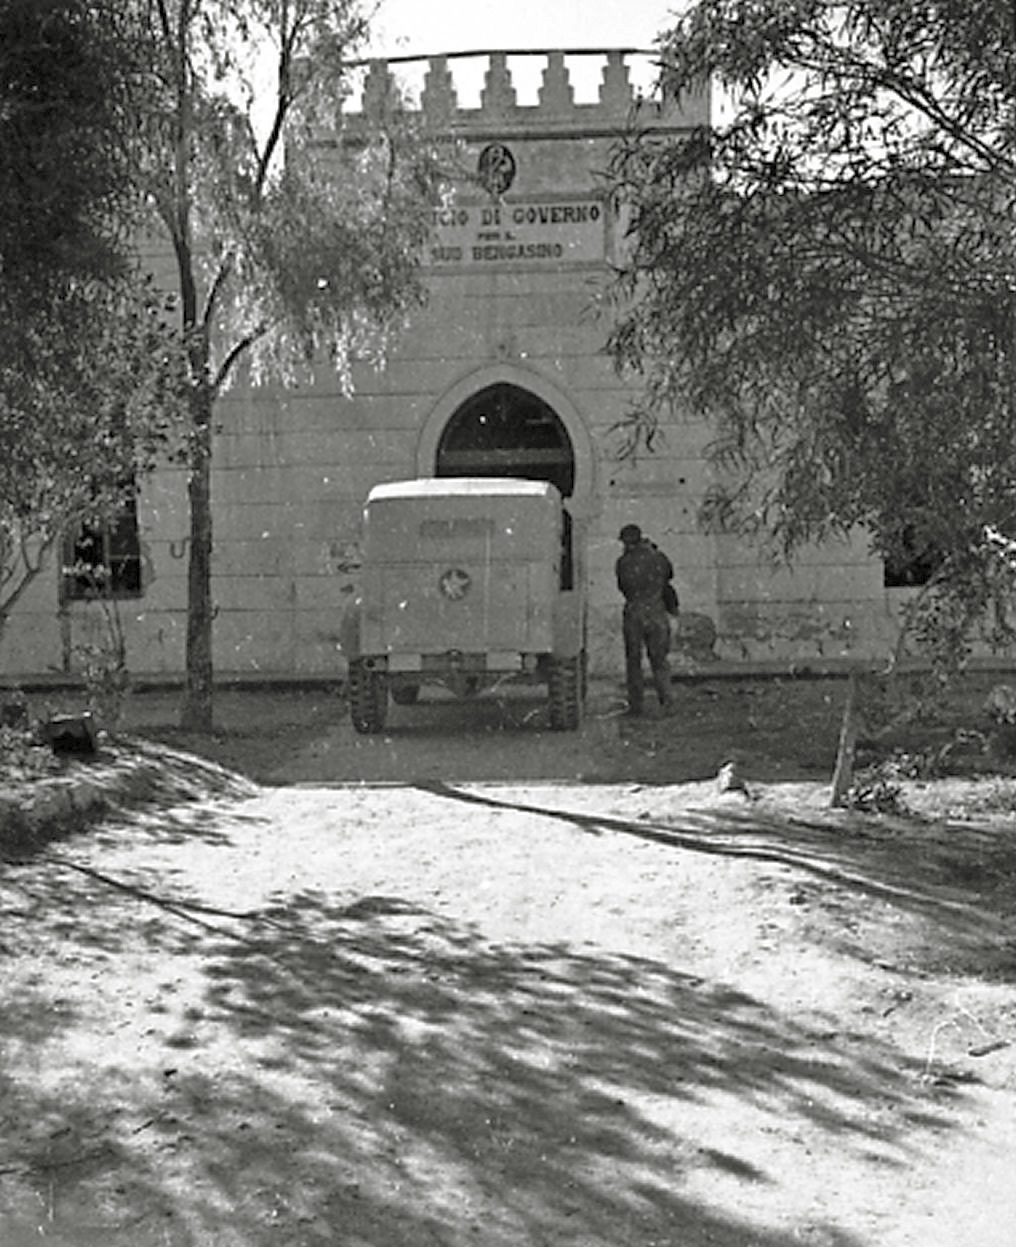 I recently acquired some negatives and had these ones developed. They are not in the greatest of shape but seem very interesting. They all seem to be from WW2. Not sure of the actual location or what the building is.

[This is in Libya. -tterrace]